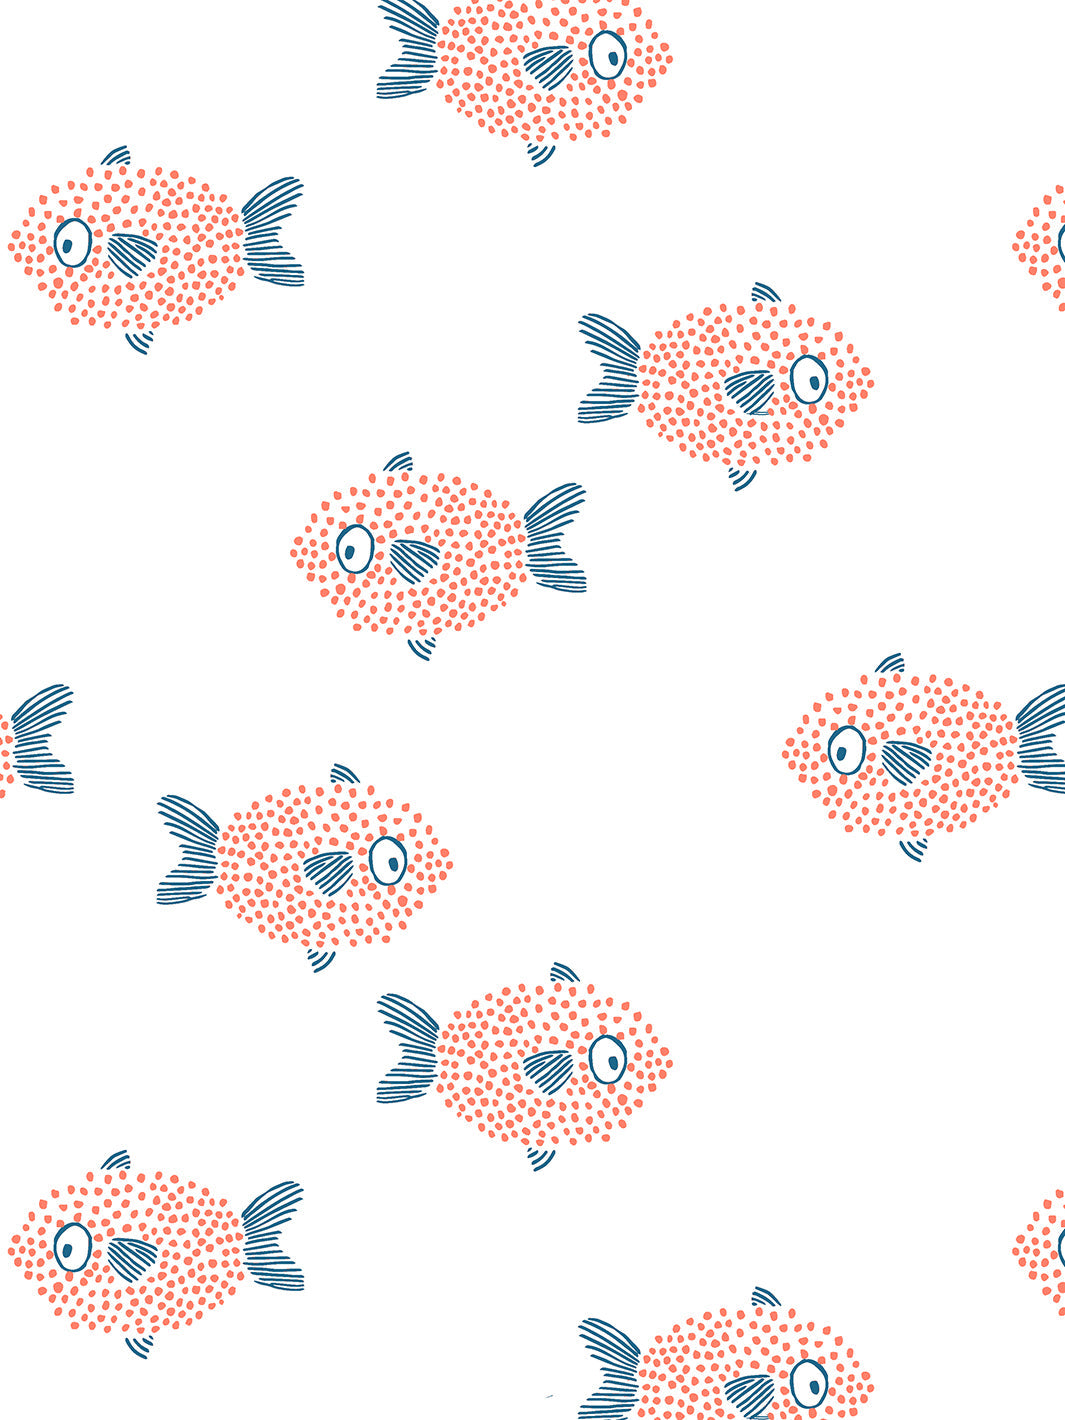 'School of Fish' Wallpaper by Tea Collection - White